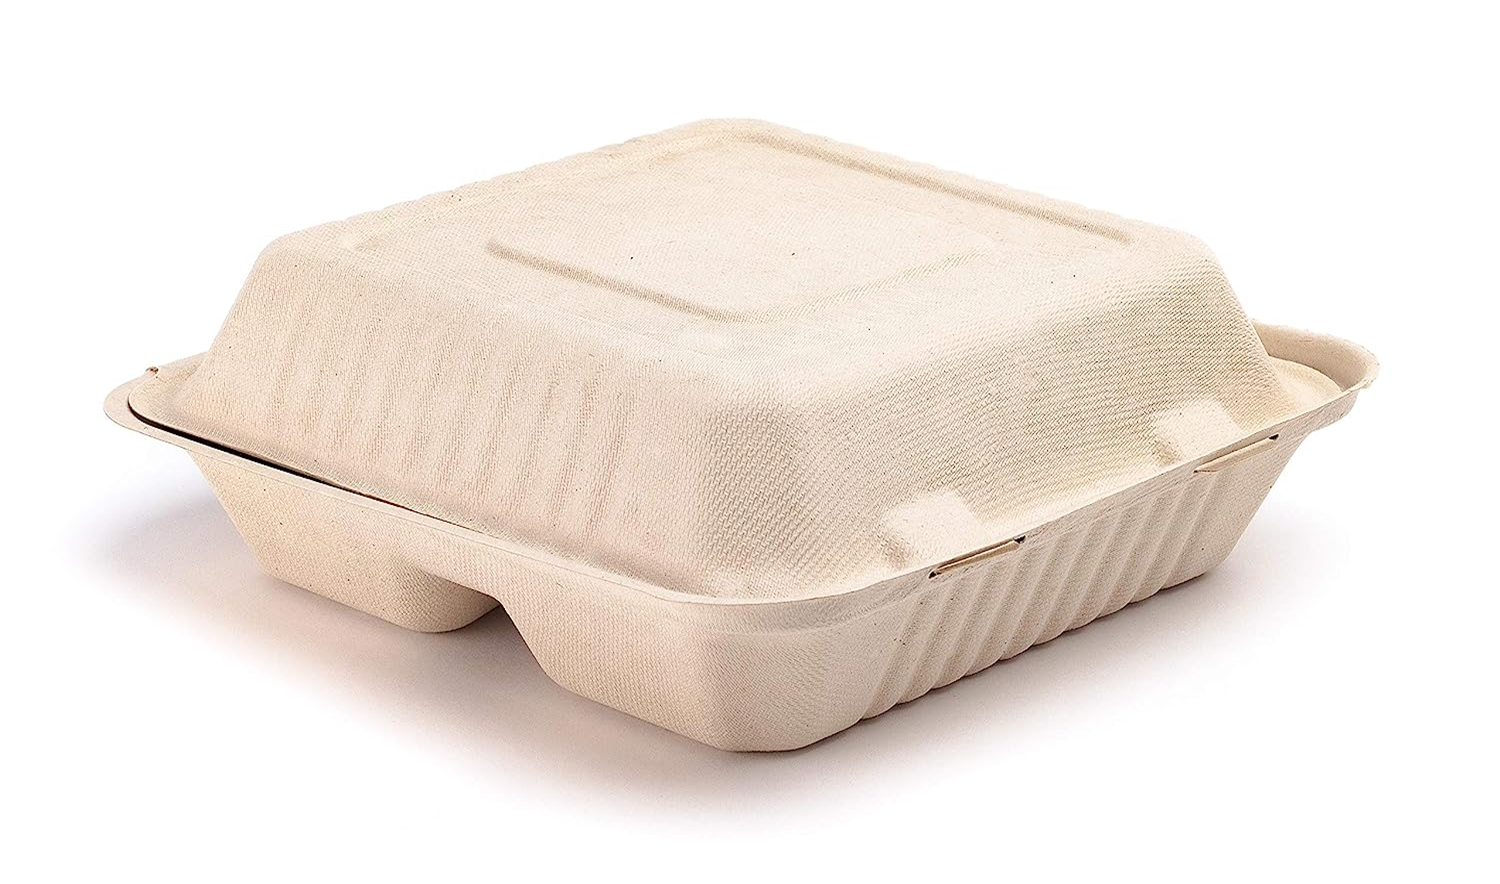 Reduce landfill with these compostable 1-compartment 9-in x 9-in x 3-in Bagasse Hinged Clamshell Food Containers constructed with reclaimed sugarcane. 